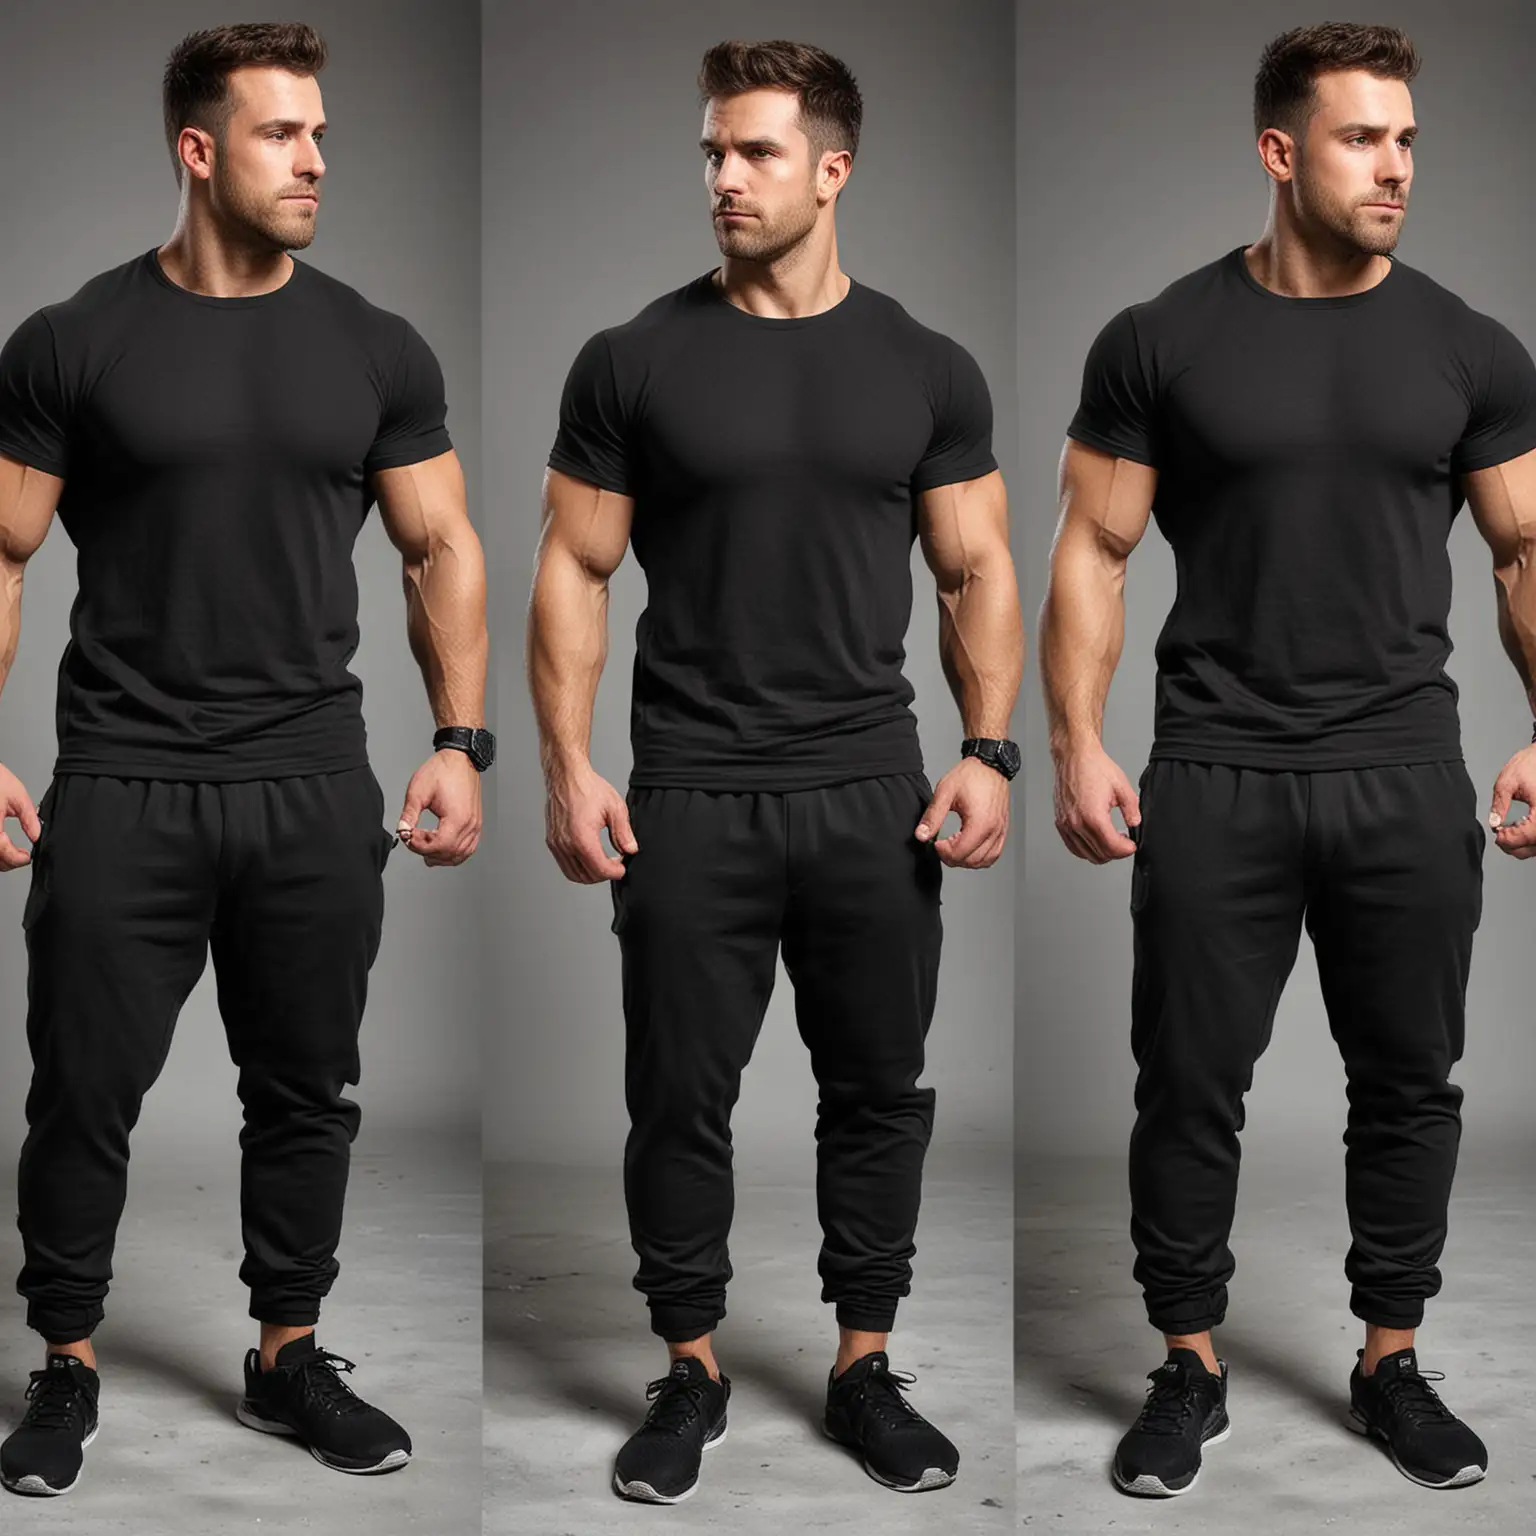 CrossFit Man in Black TShirt and Track Pants from Four Angles